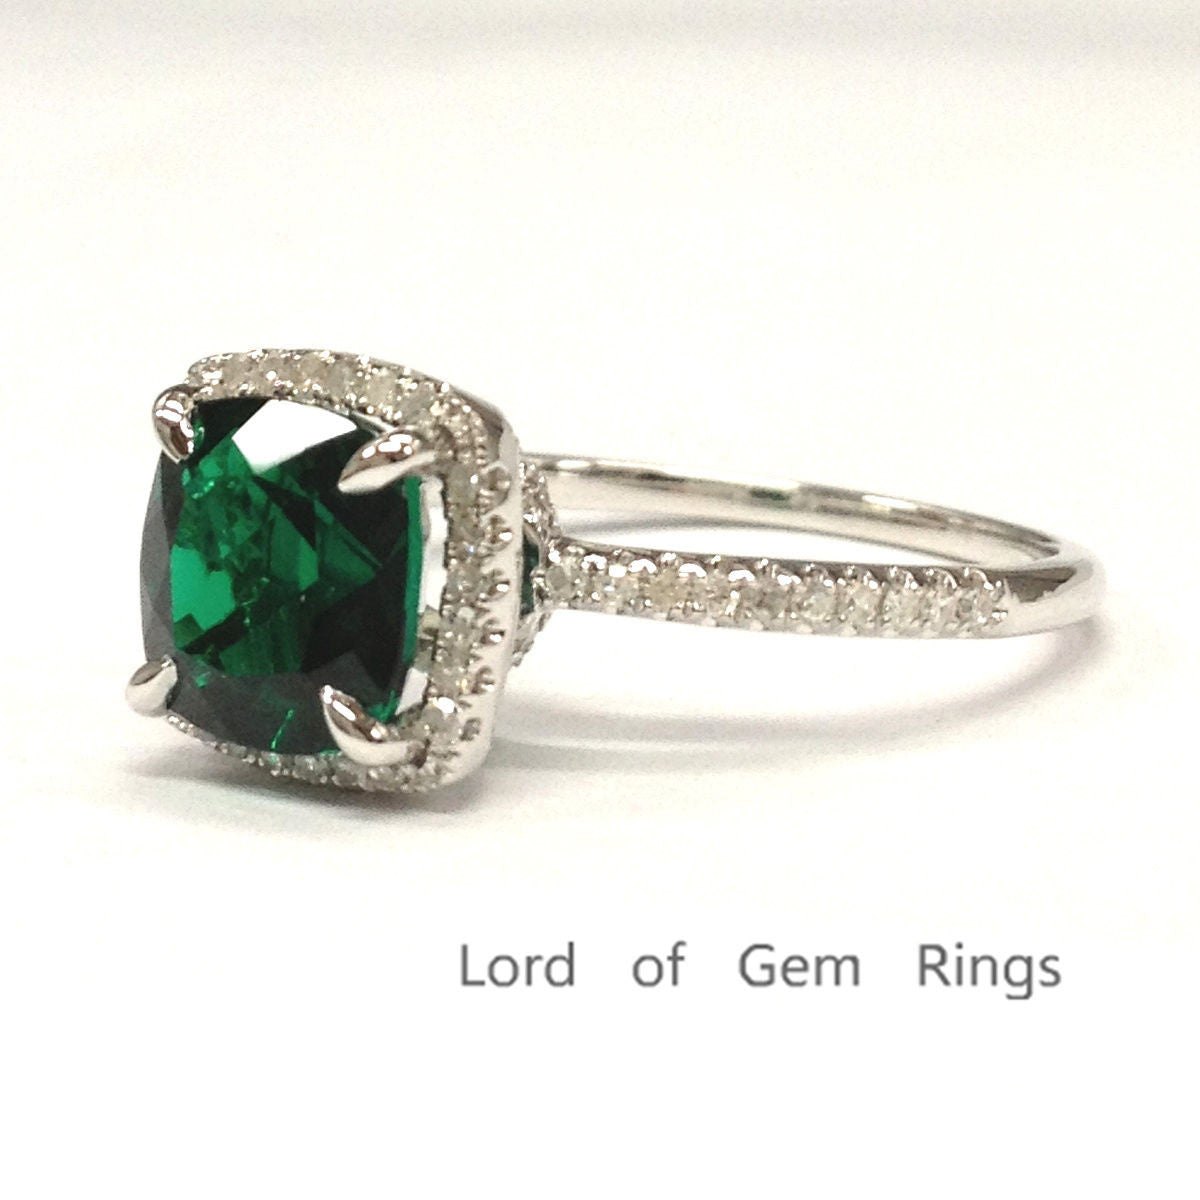 Reserved for Neil, exchange, Cushion Emerald Engagement Ring - Lord of Gem Rings - 2